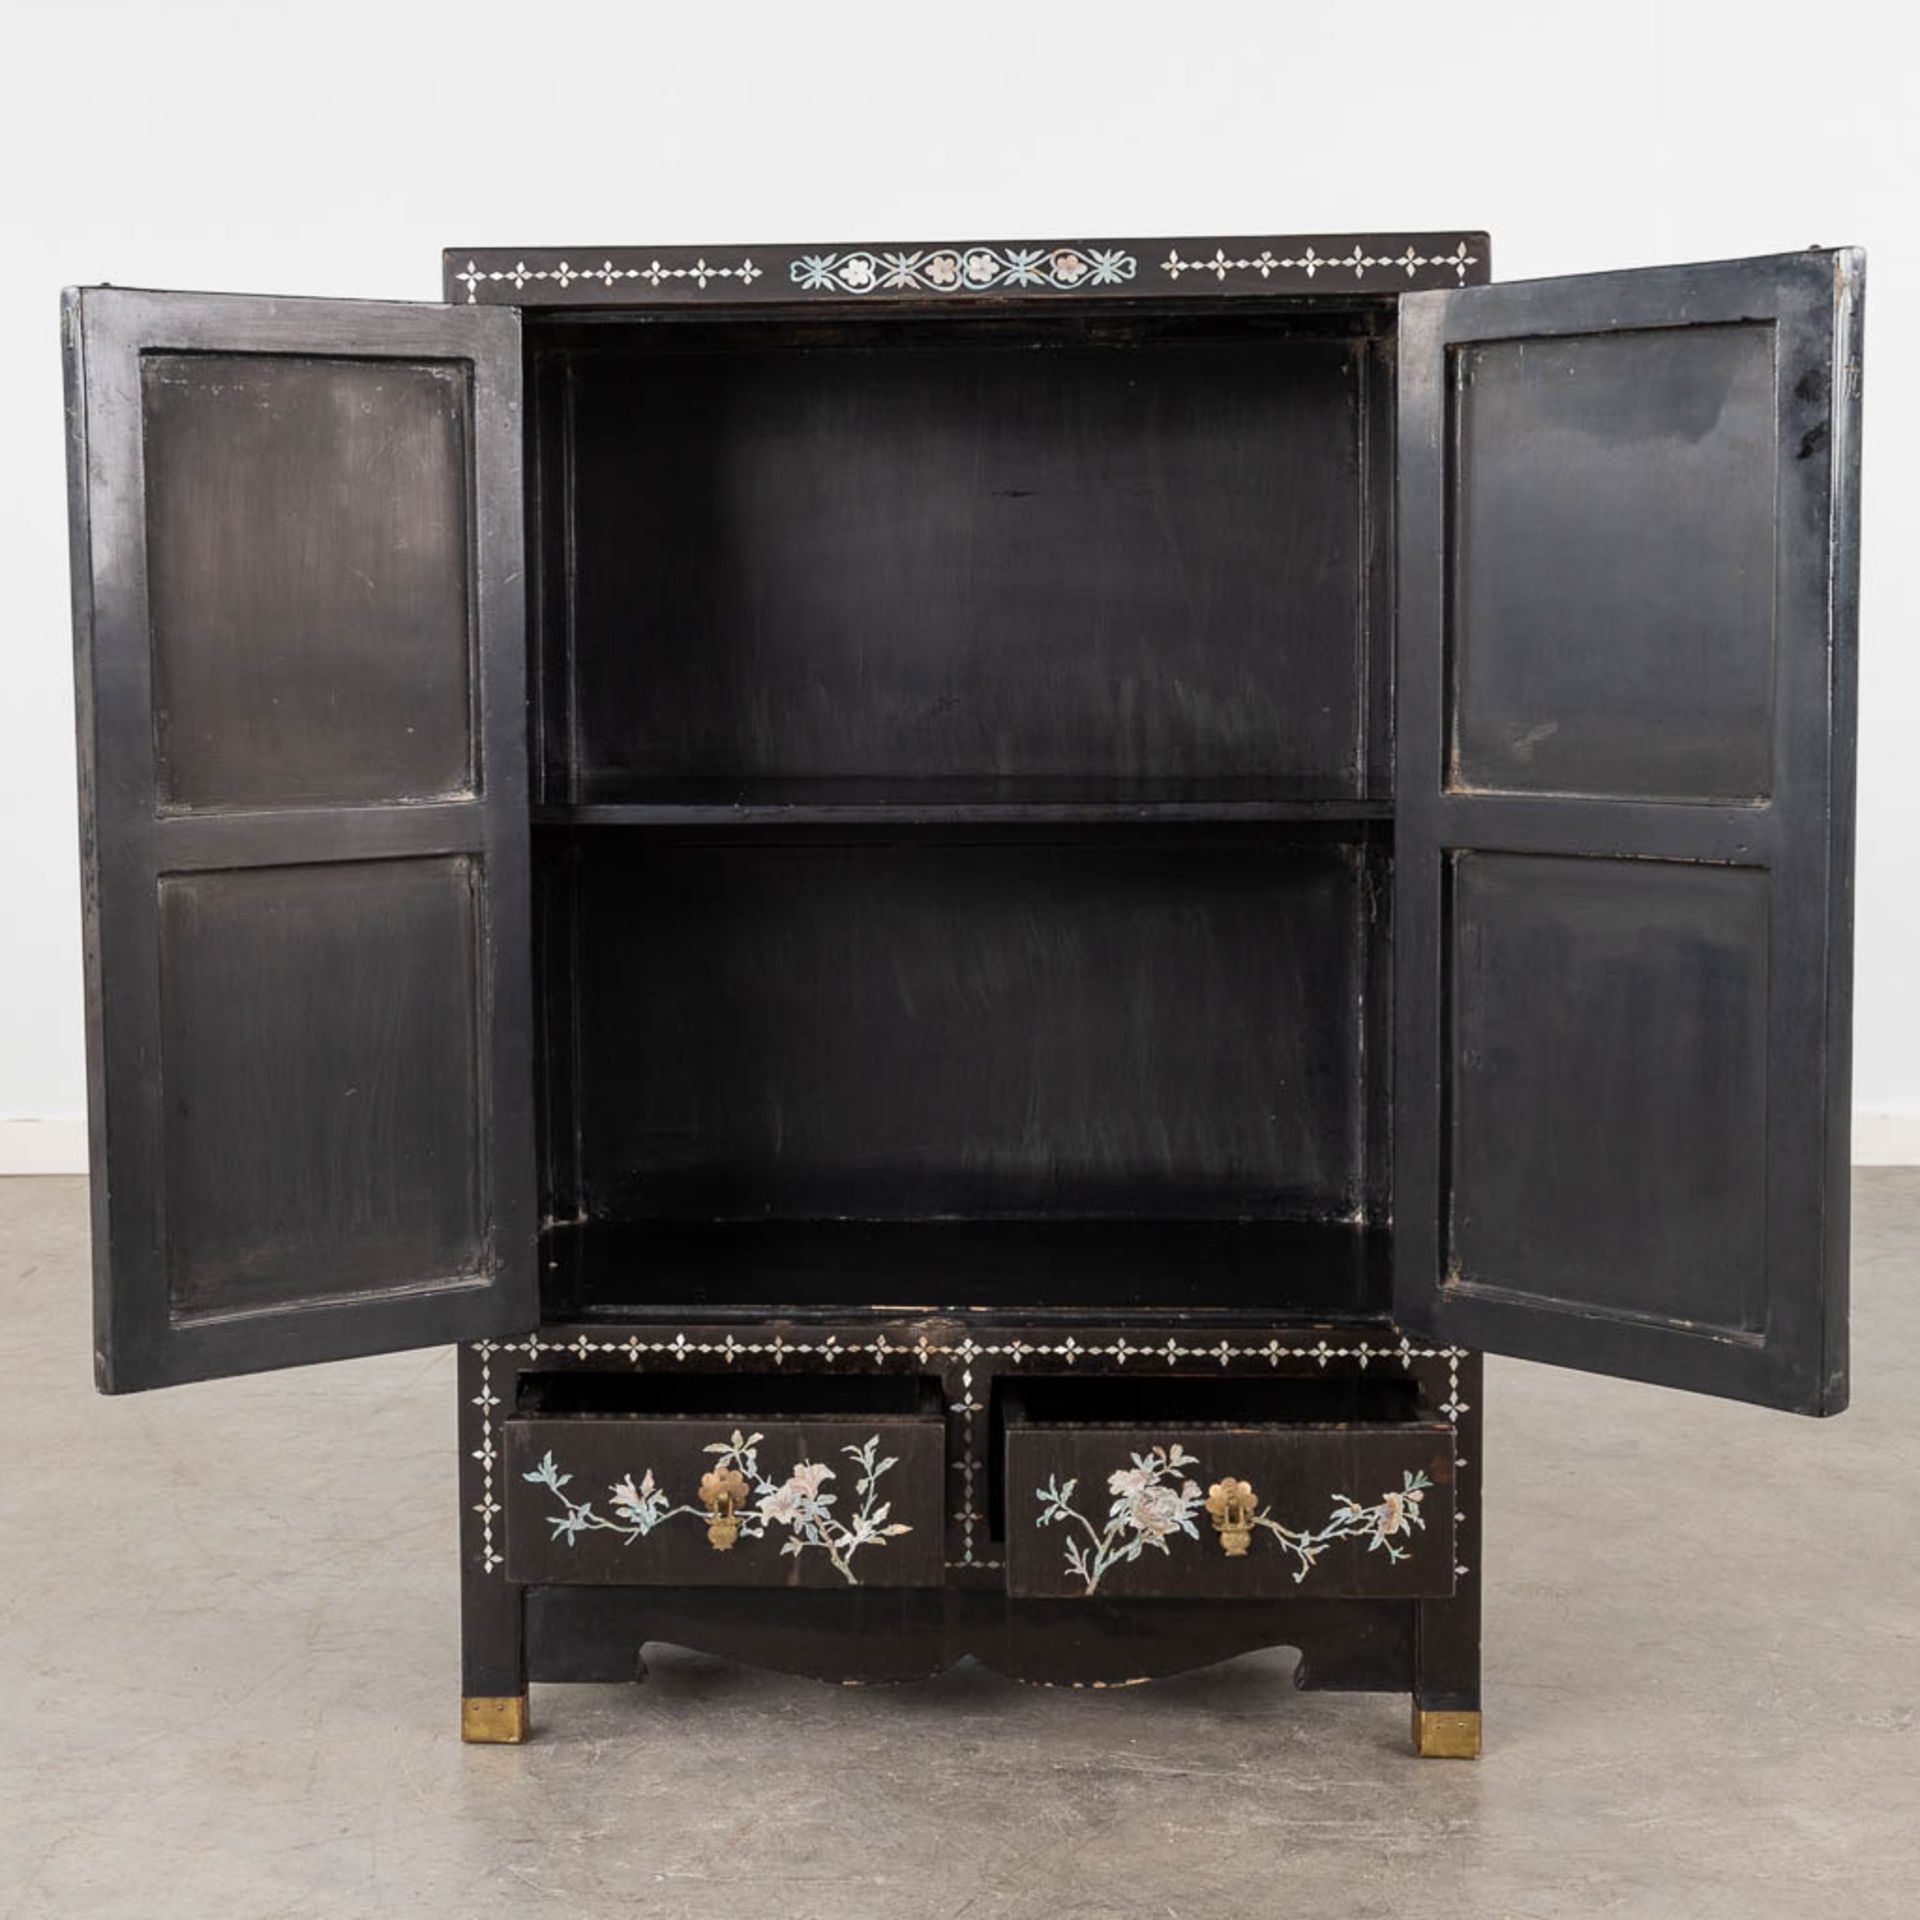 A Chinoiserie cabinet, mother of pearl inlay in ebonised wood. 20th C. (D:31 x W:61 x H:92 cm) - Bild 5 aus 14